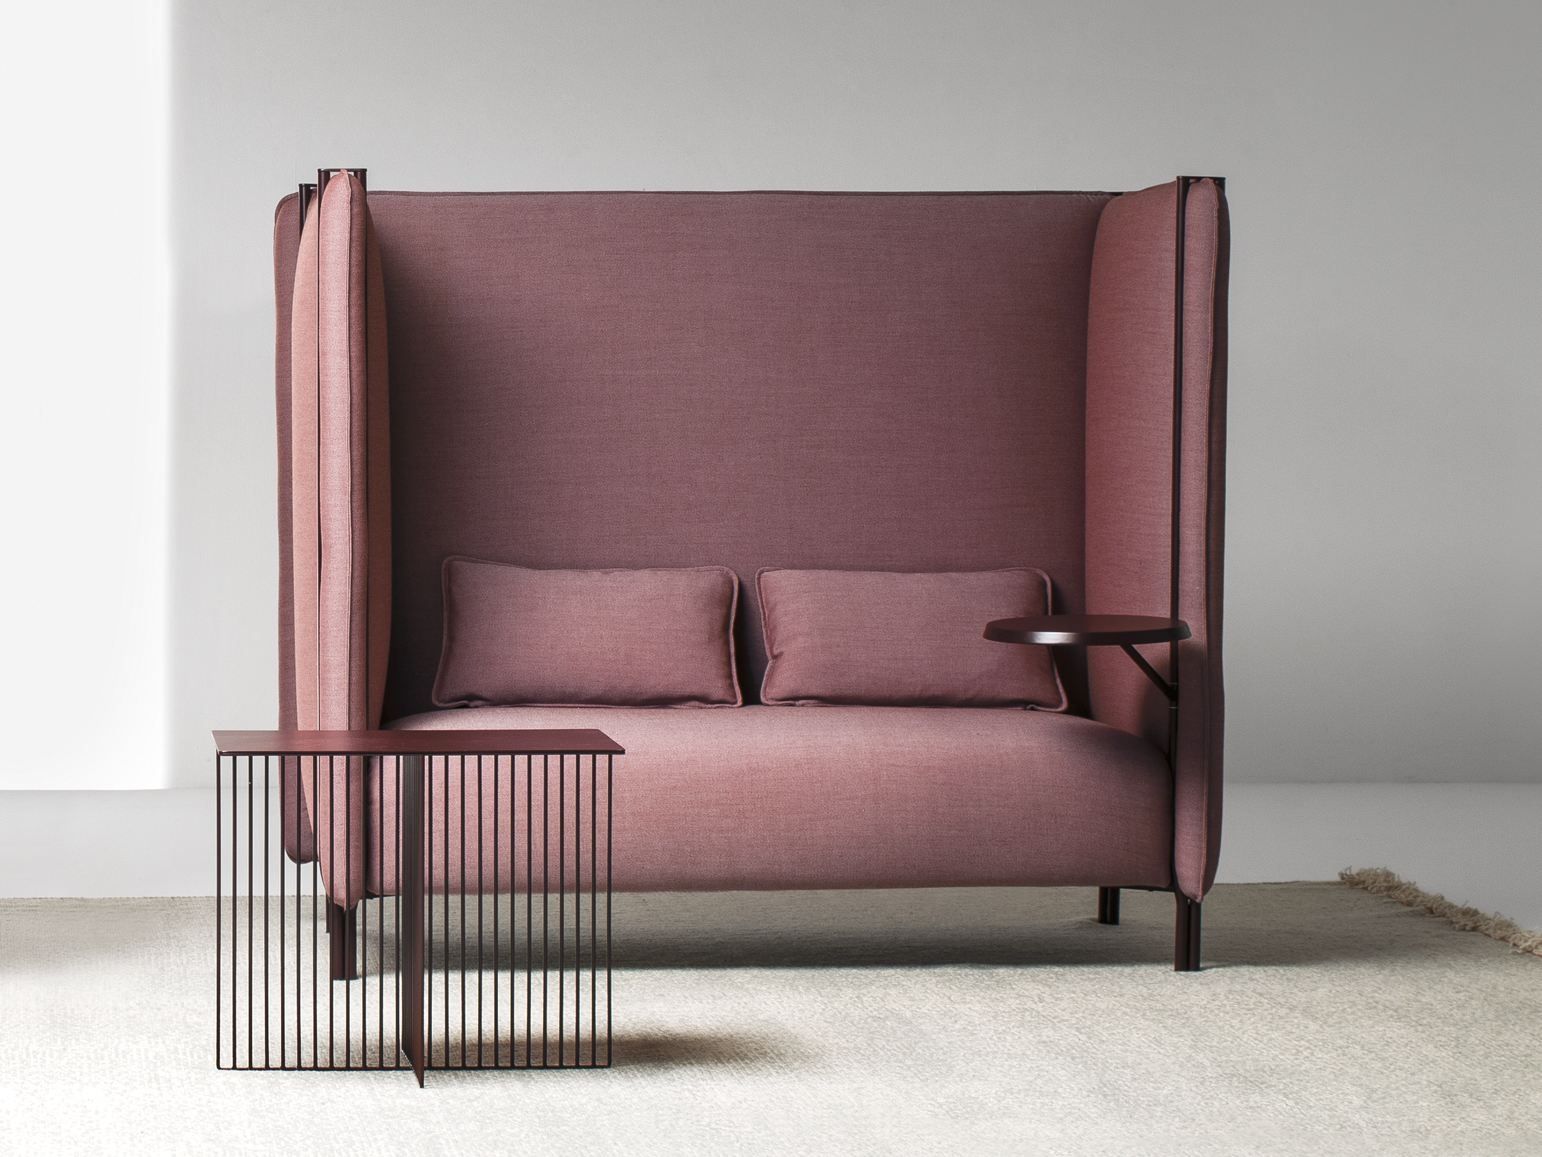 Pinch High Back Sofa Pinch Collection La Cividina Design Skrivo Throughout High Back Sofas And Chairs (View 7 of 15)